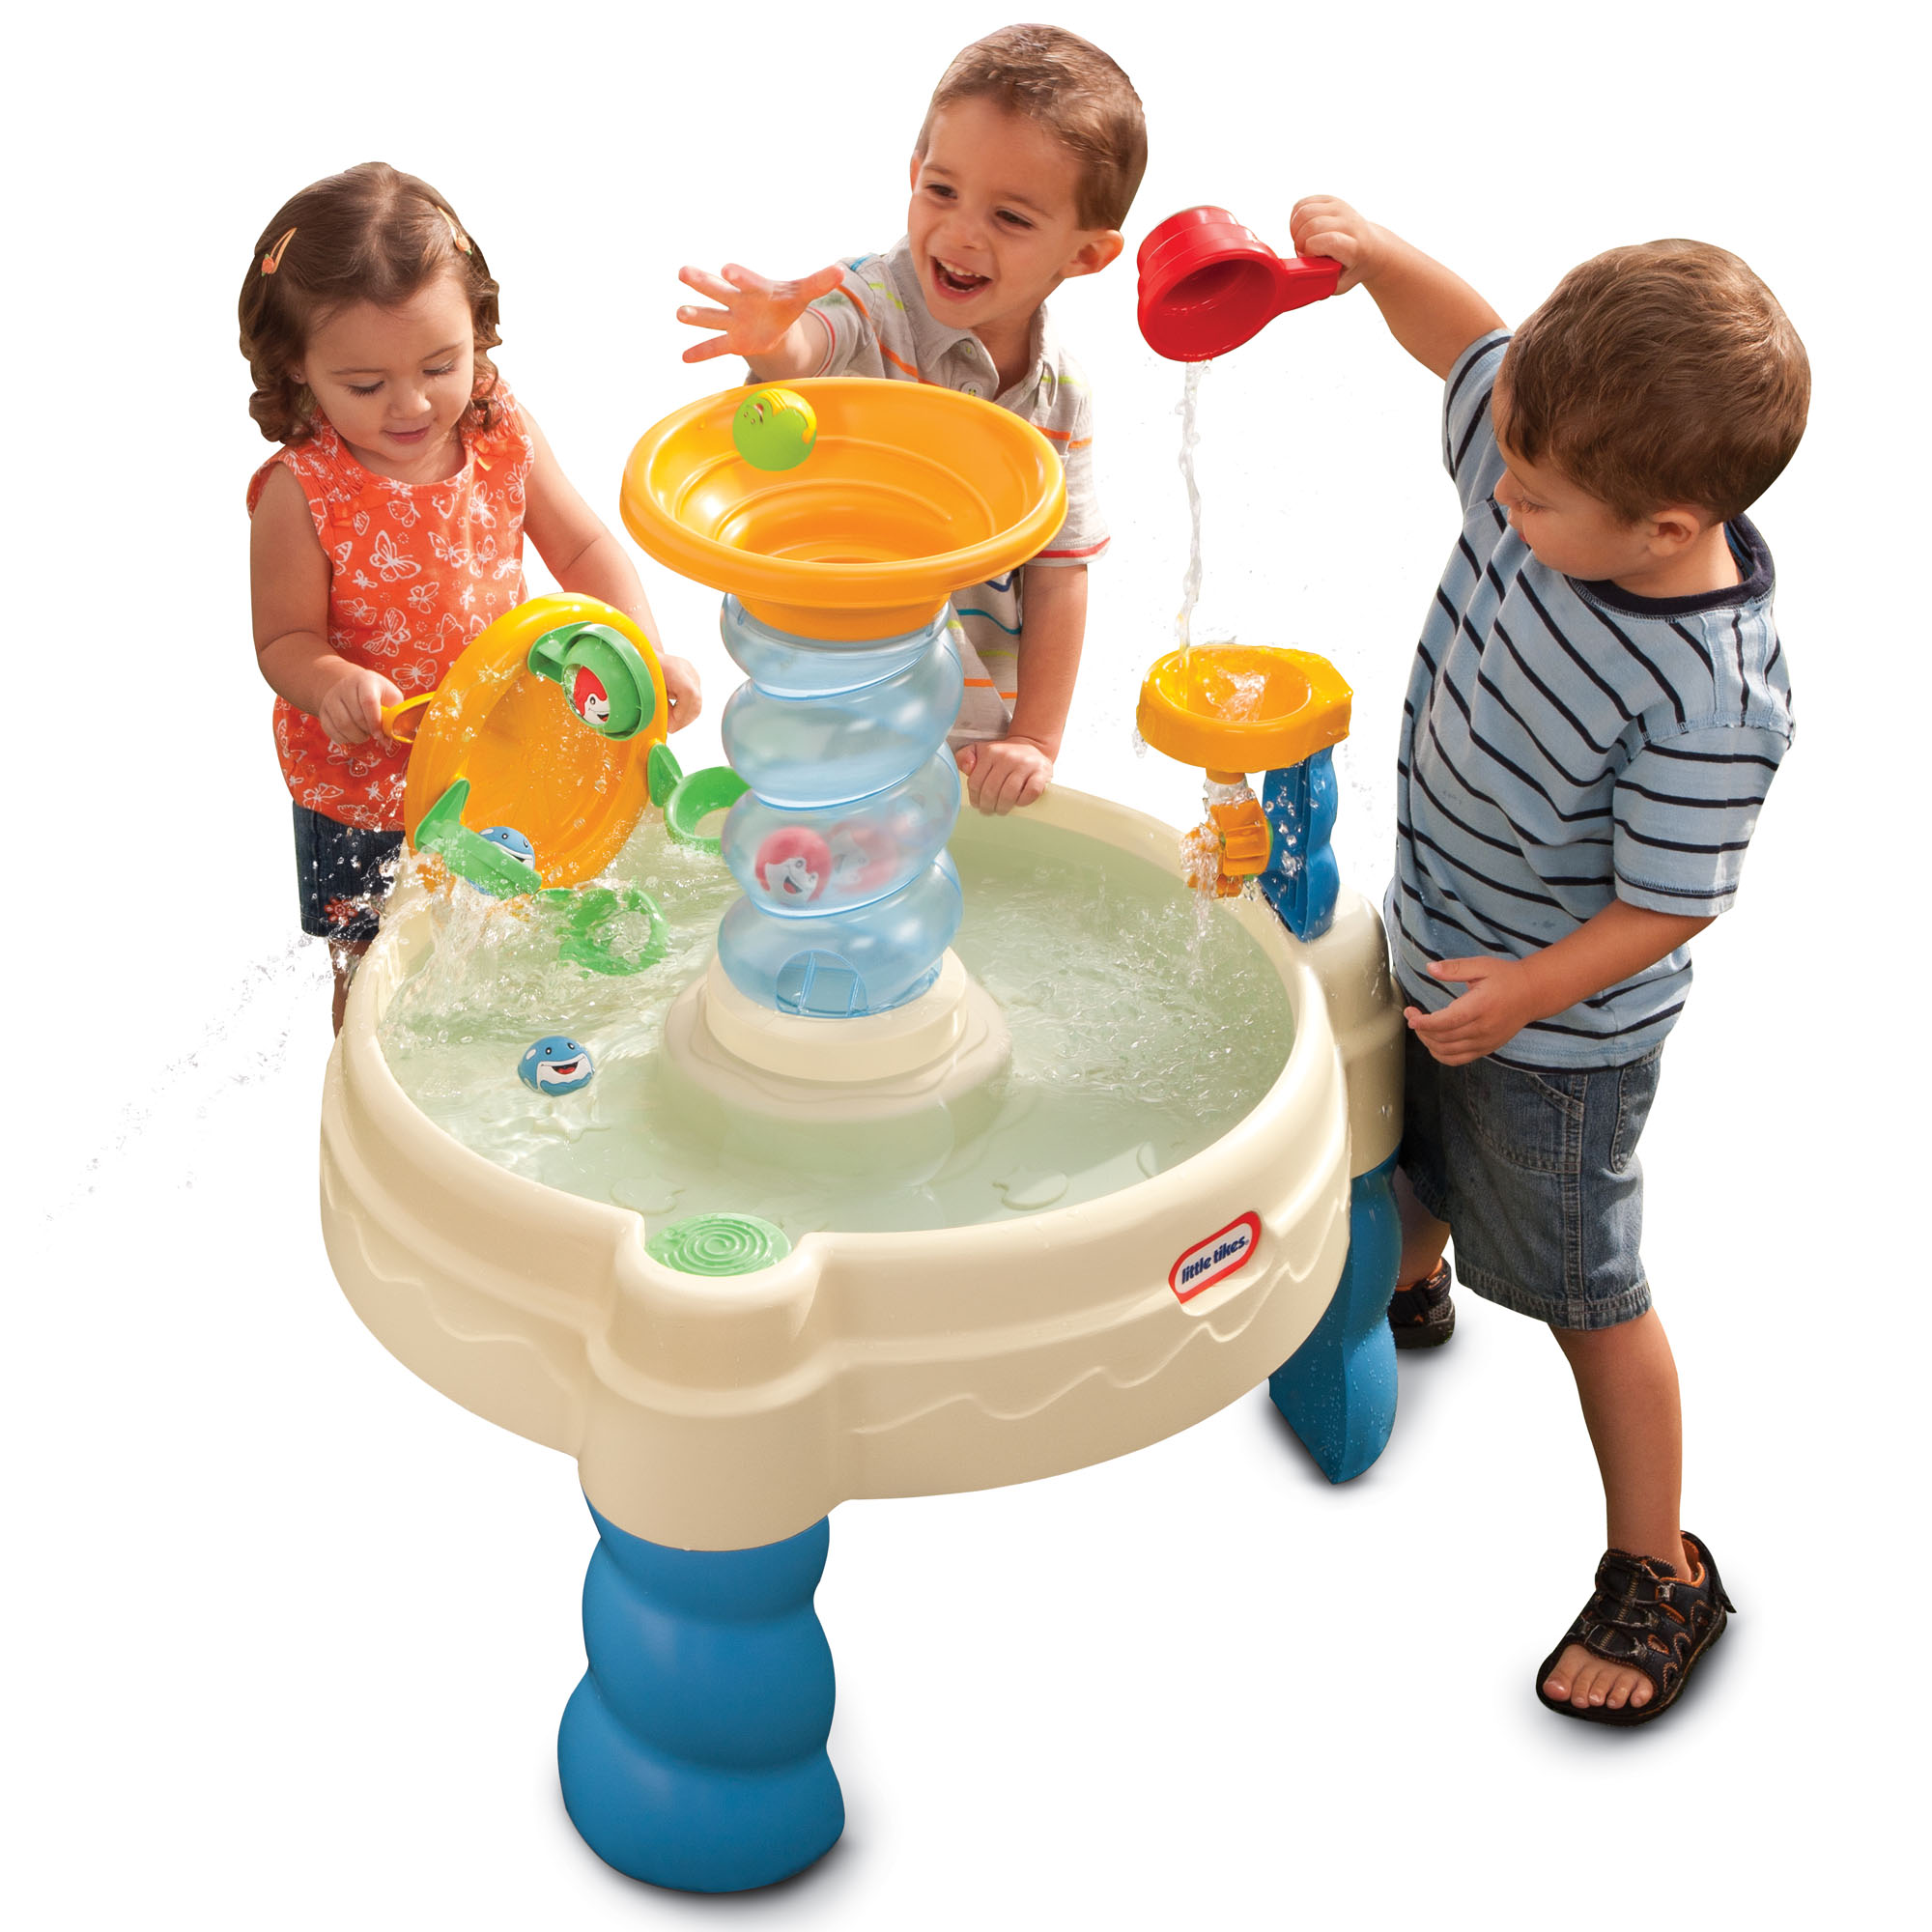 Little Tikes Spiralin' Seas Water Park Water Table with Lazy River Splash Action, Water Wheel and 6 Piece Accessory Set, Outdoor Backyard Play Set for Toddlers Kids Boys Girls Ages 2 3 4+ Year Old - image 1 of 9